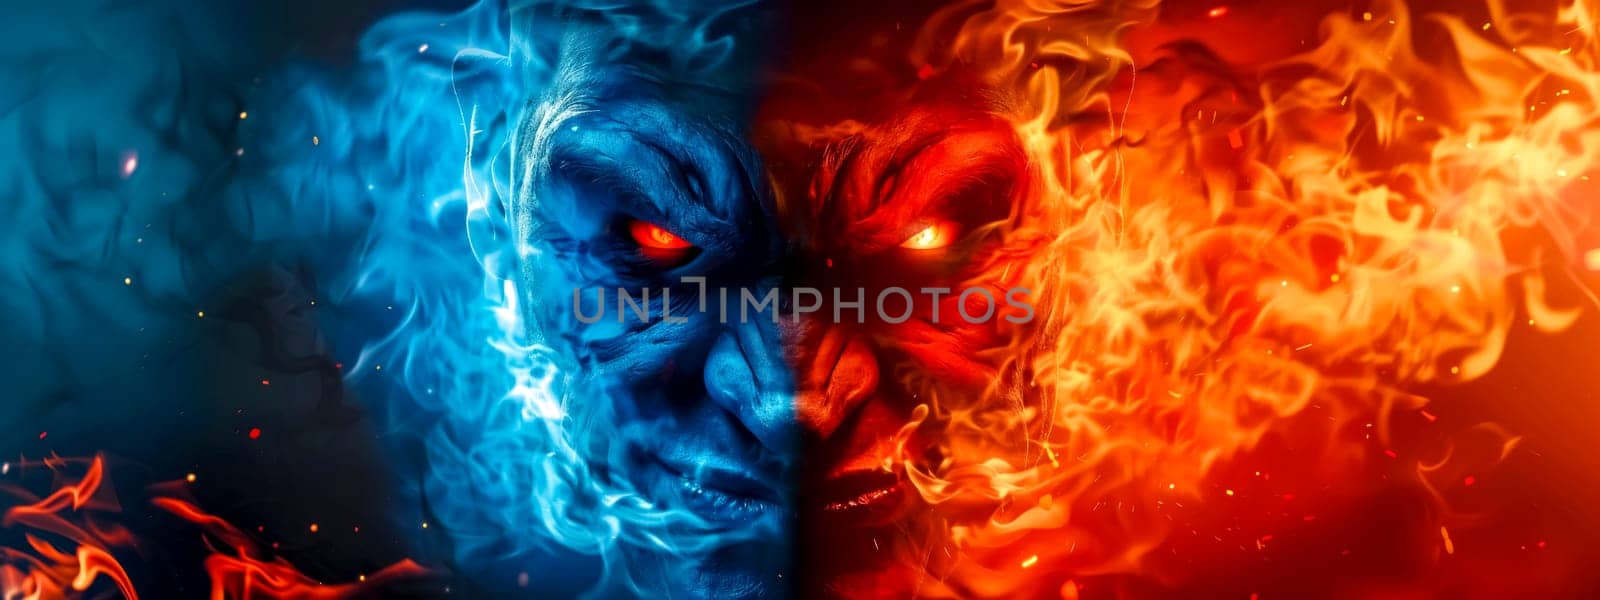 Fiery and icy demonic faces concept by Edophoto